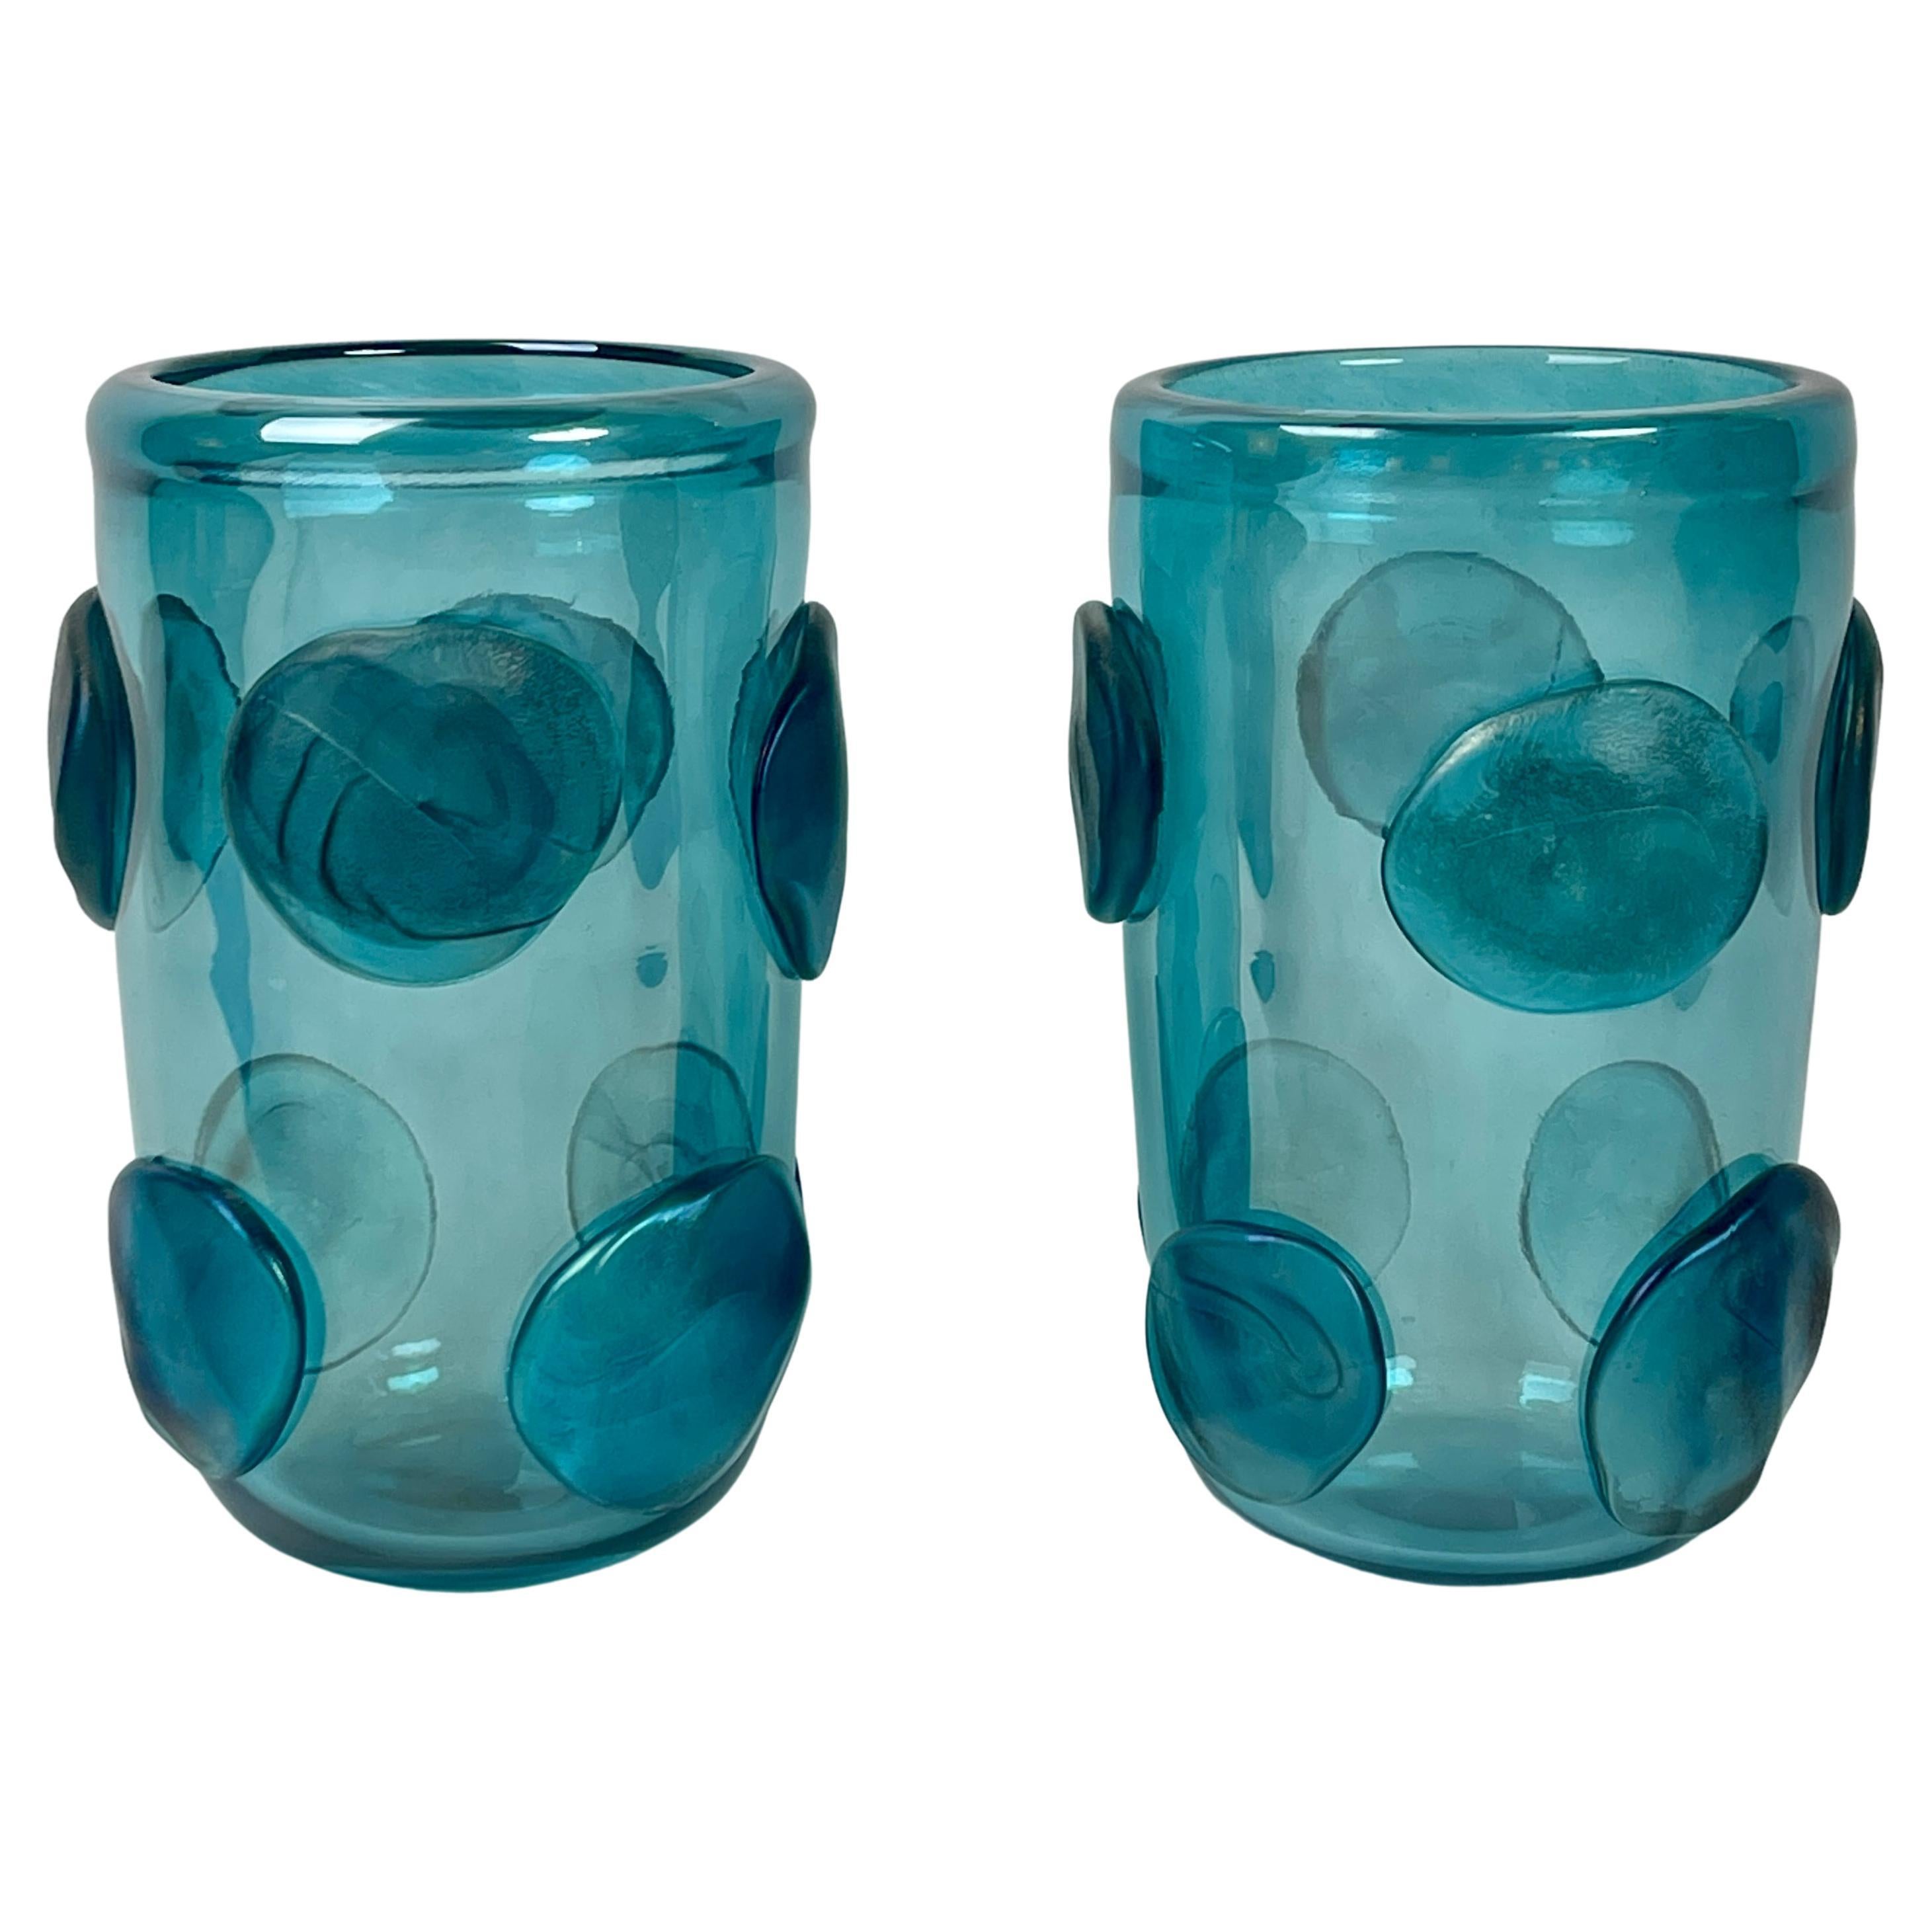 Late 20th Century Pair of Light Blue Murano Art Glass Vases by Costantini For Sale